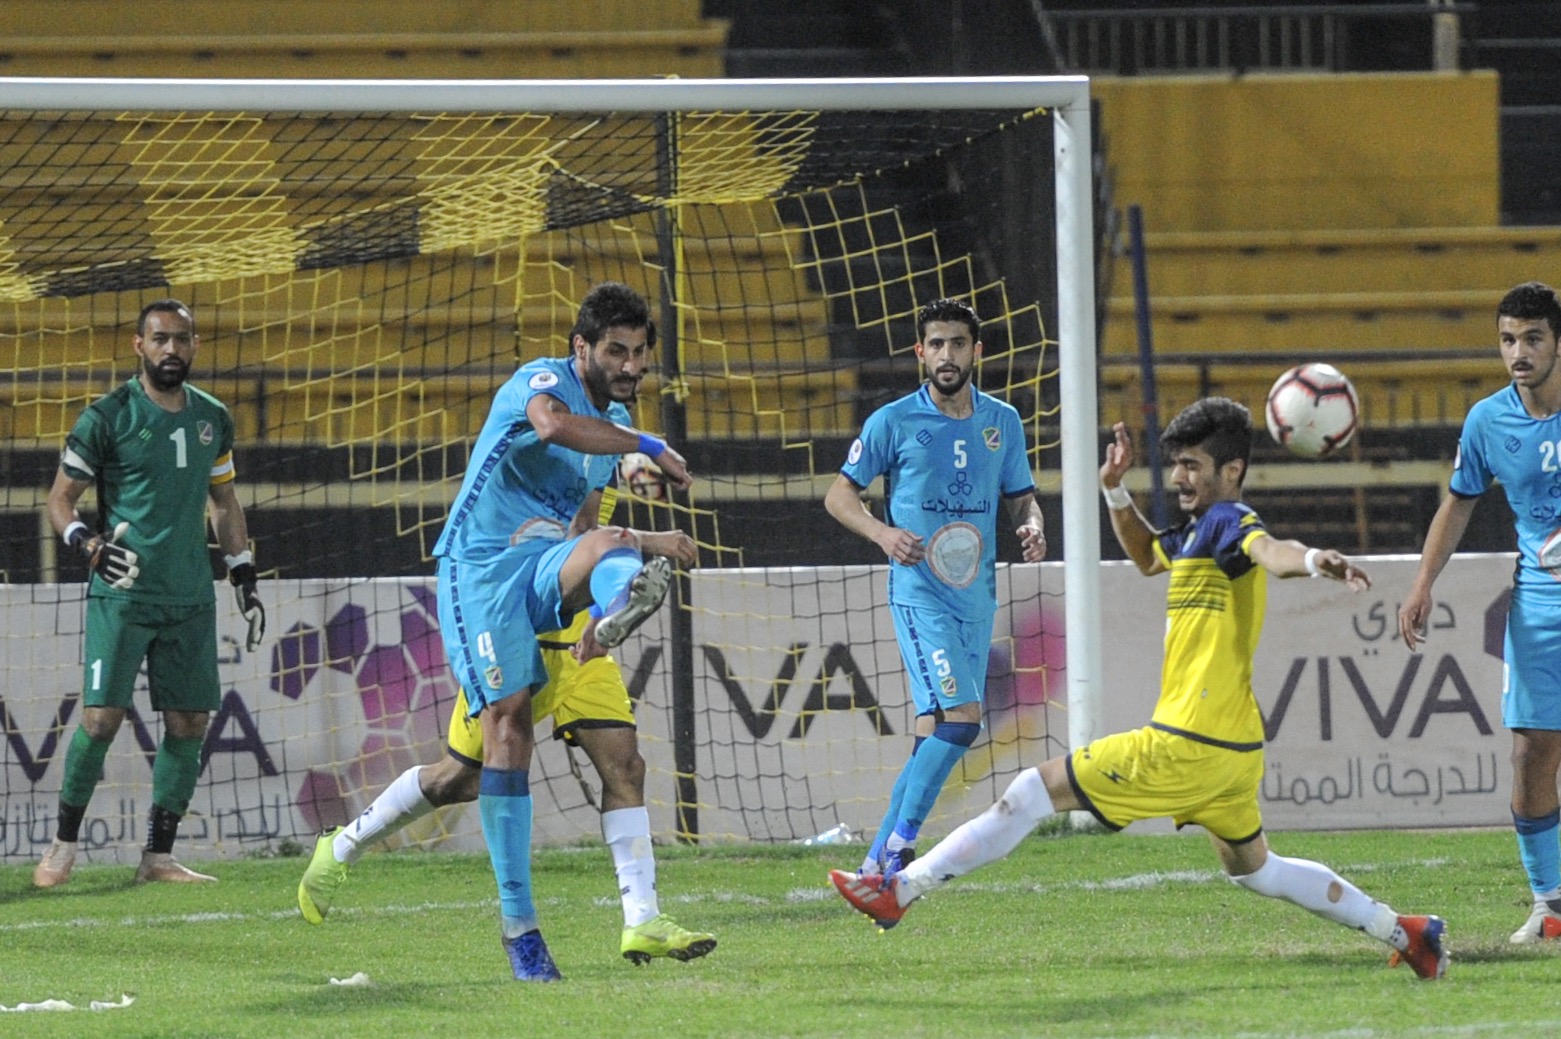 Salmiya had to go to extra time against Sahel to win the game